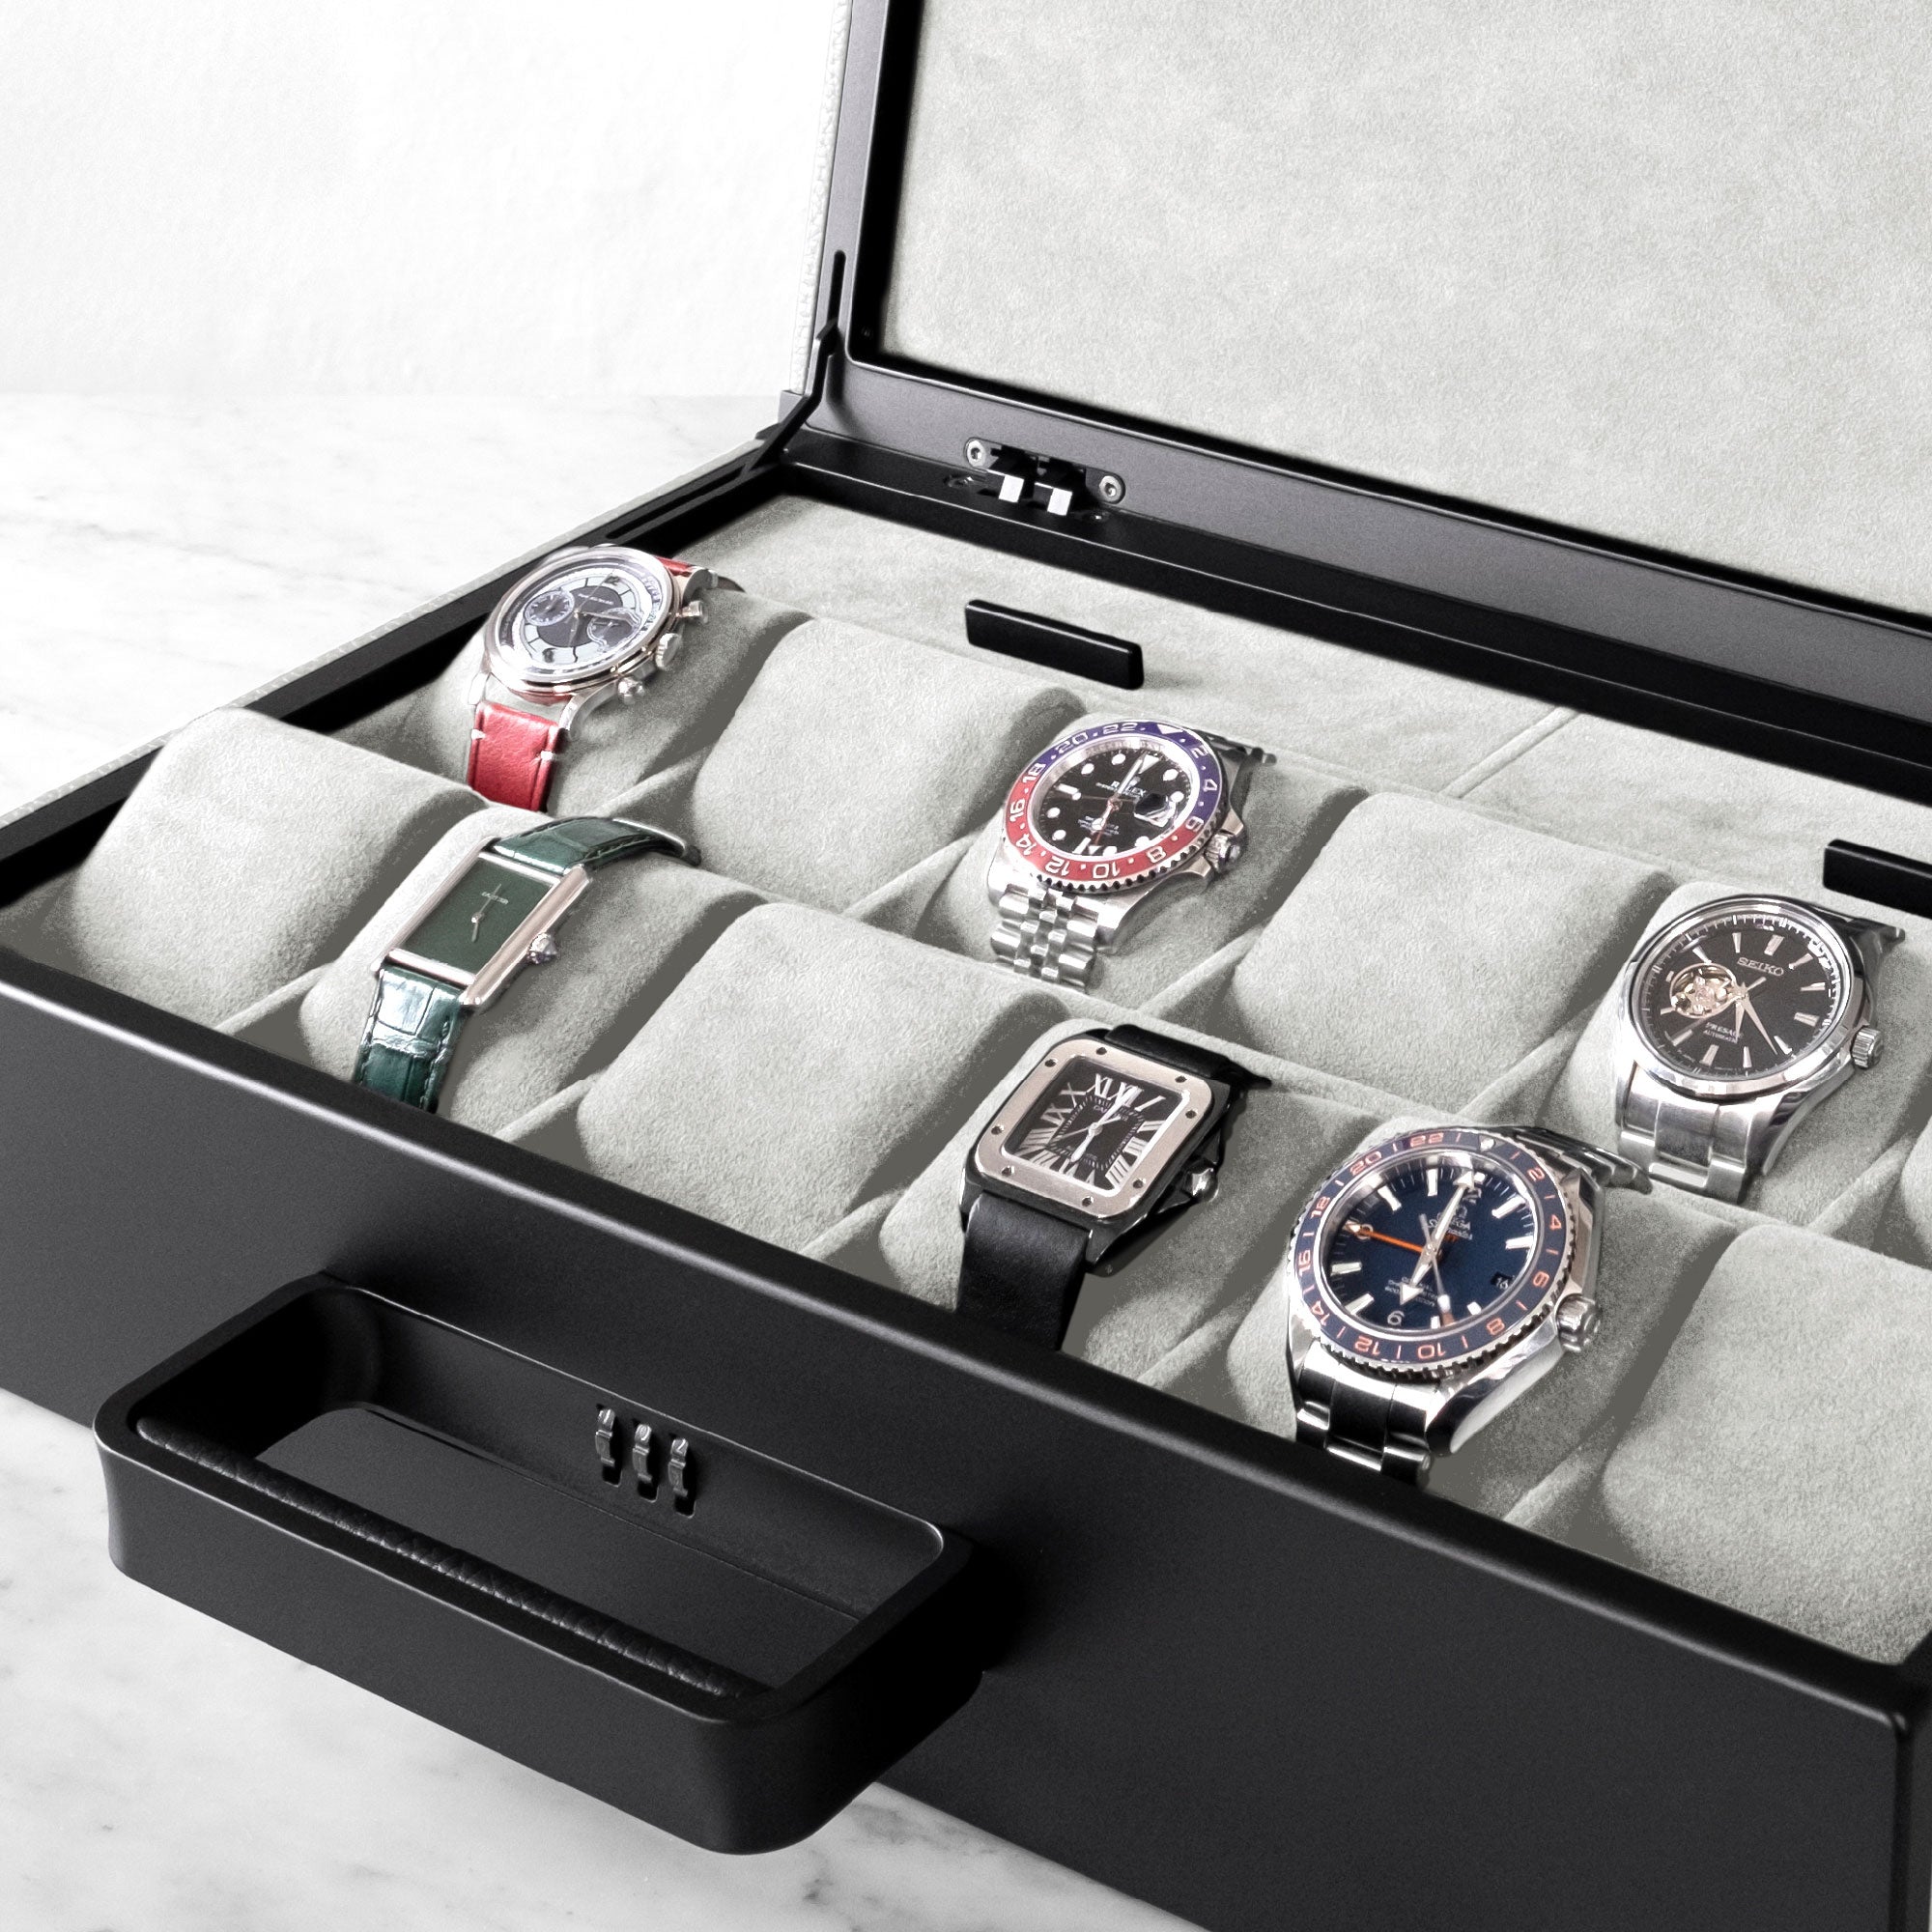 Lifestyle shot of Mackenzie Watch briefcase 12 filled with luxury watches including Rolex, Omega and Cartier